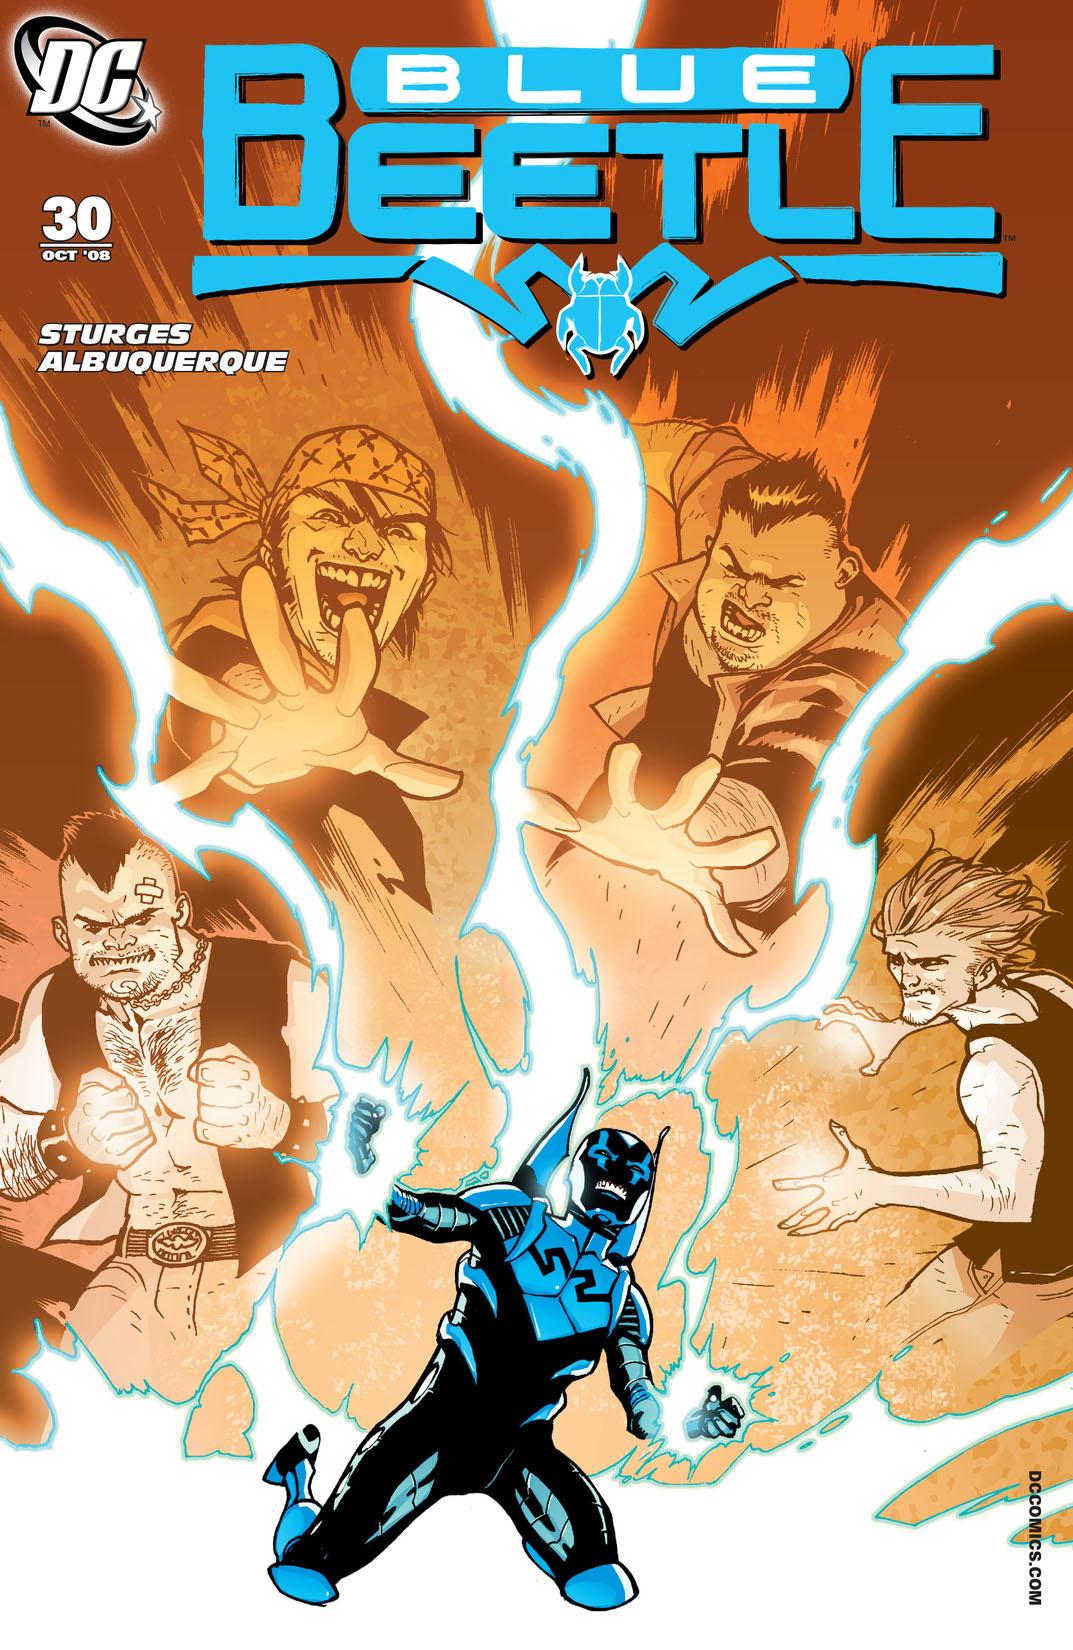 Blue Beetle (2006-) #30 preview images